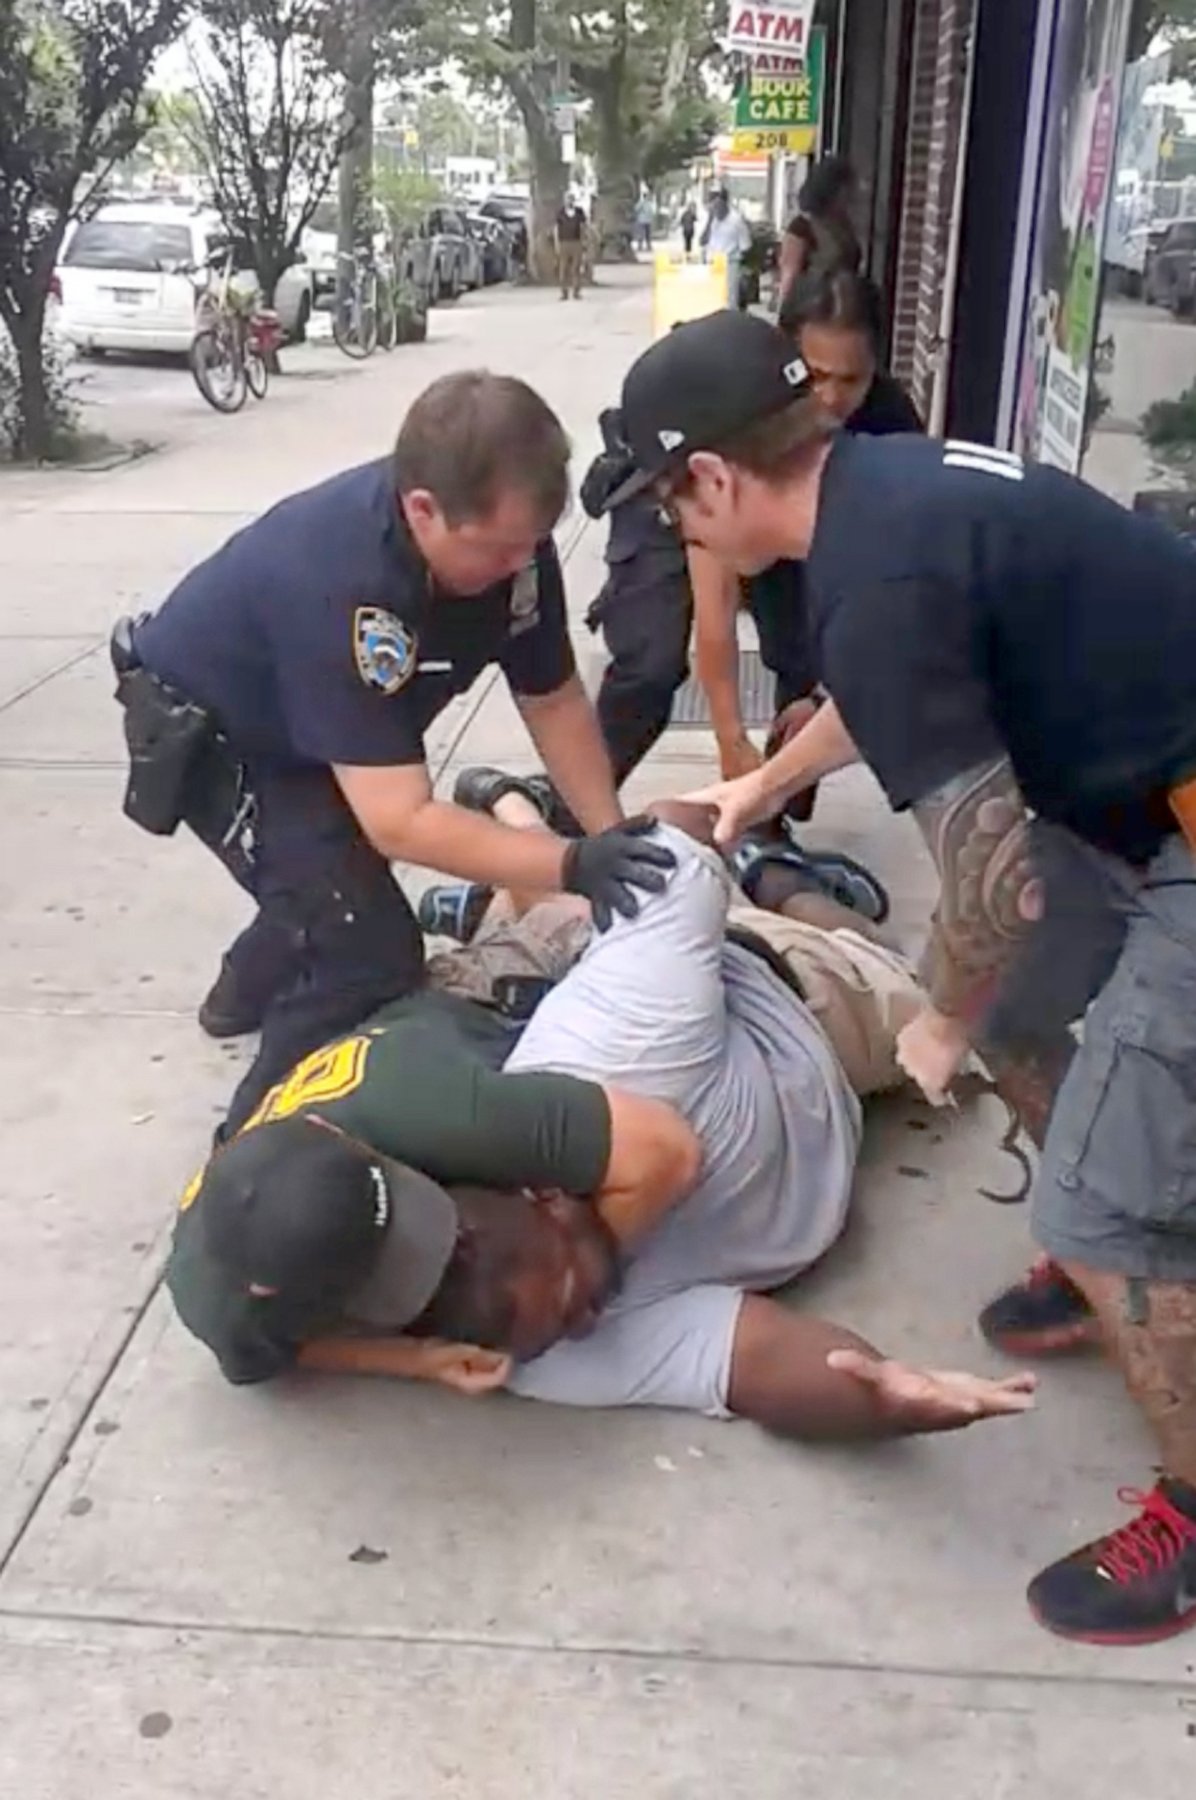 PHOTO: A 400- pound asthmatic Eric Garner died while being arrested by police in Staten Island.